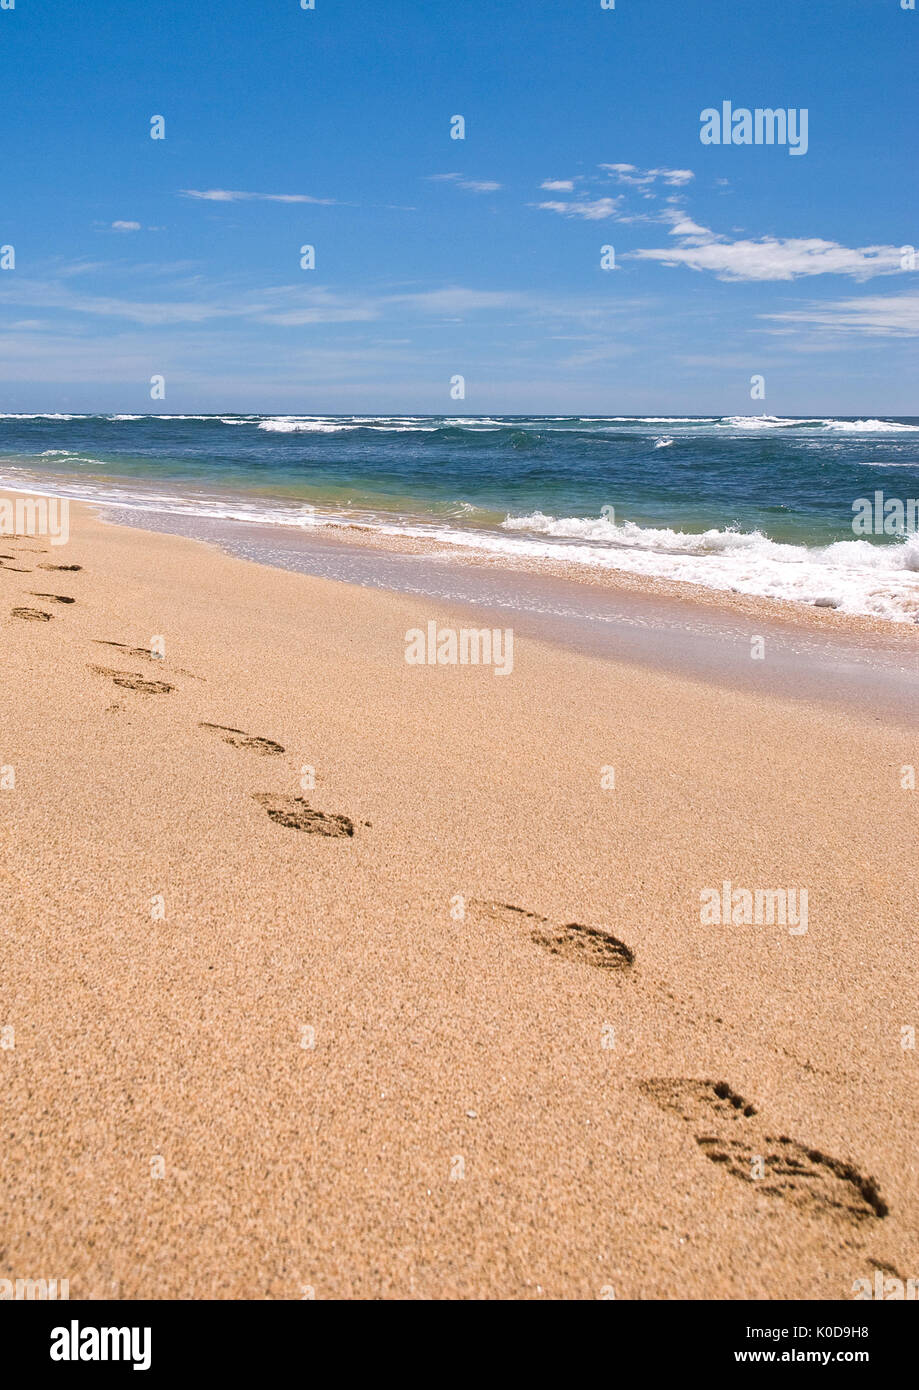 Footsteps on Tropical Beach Stock Photo